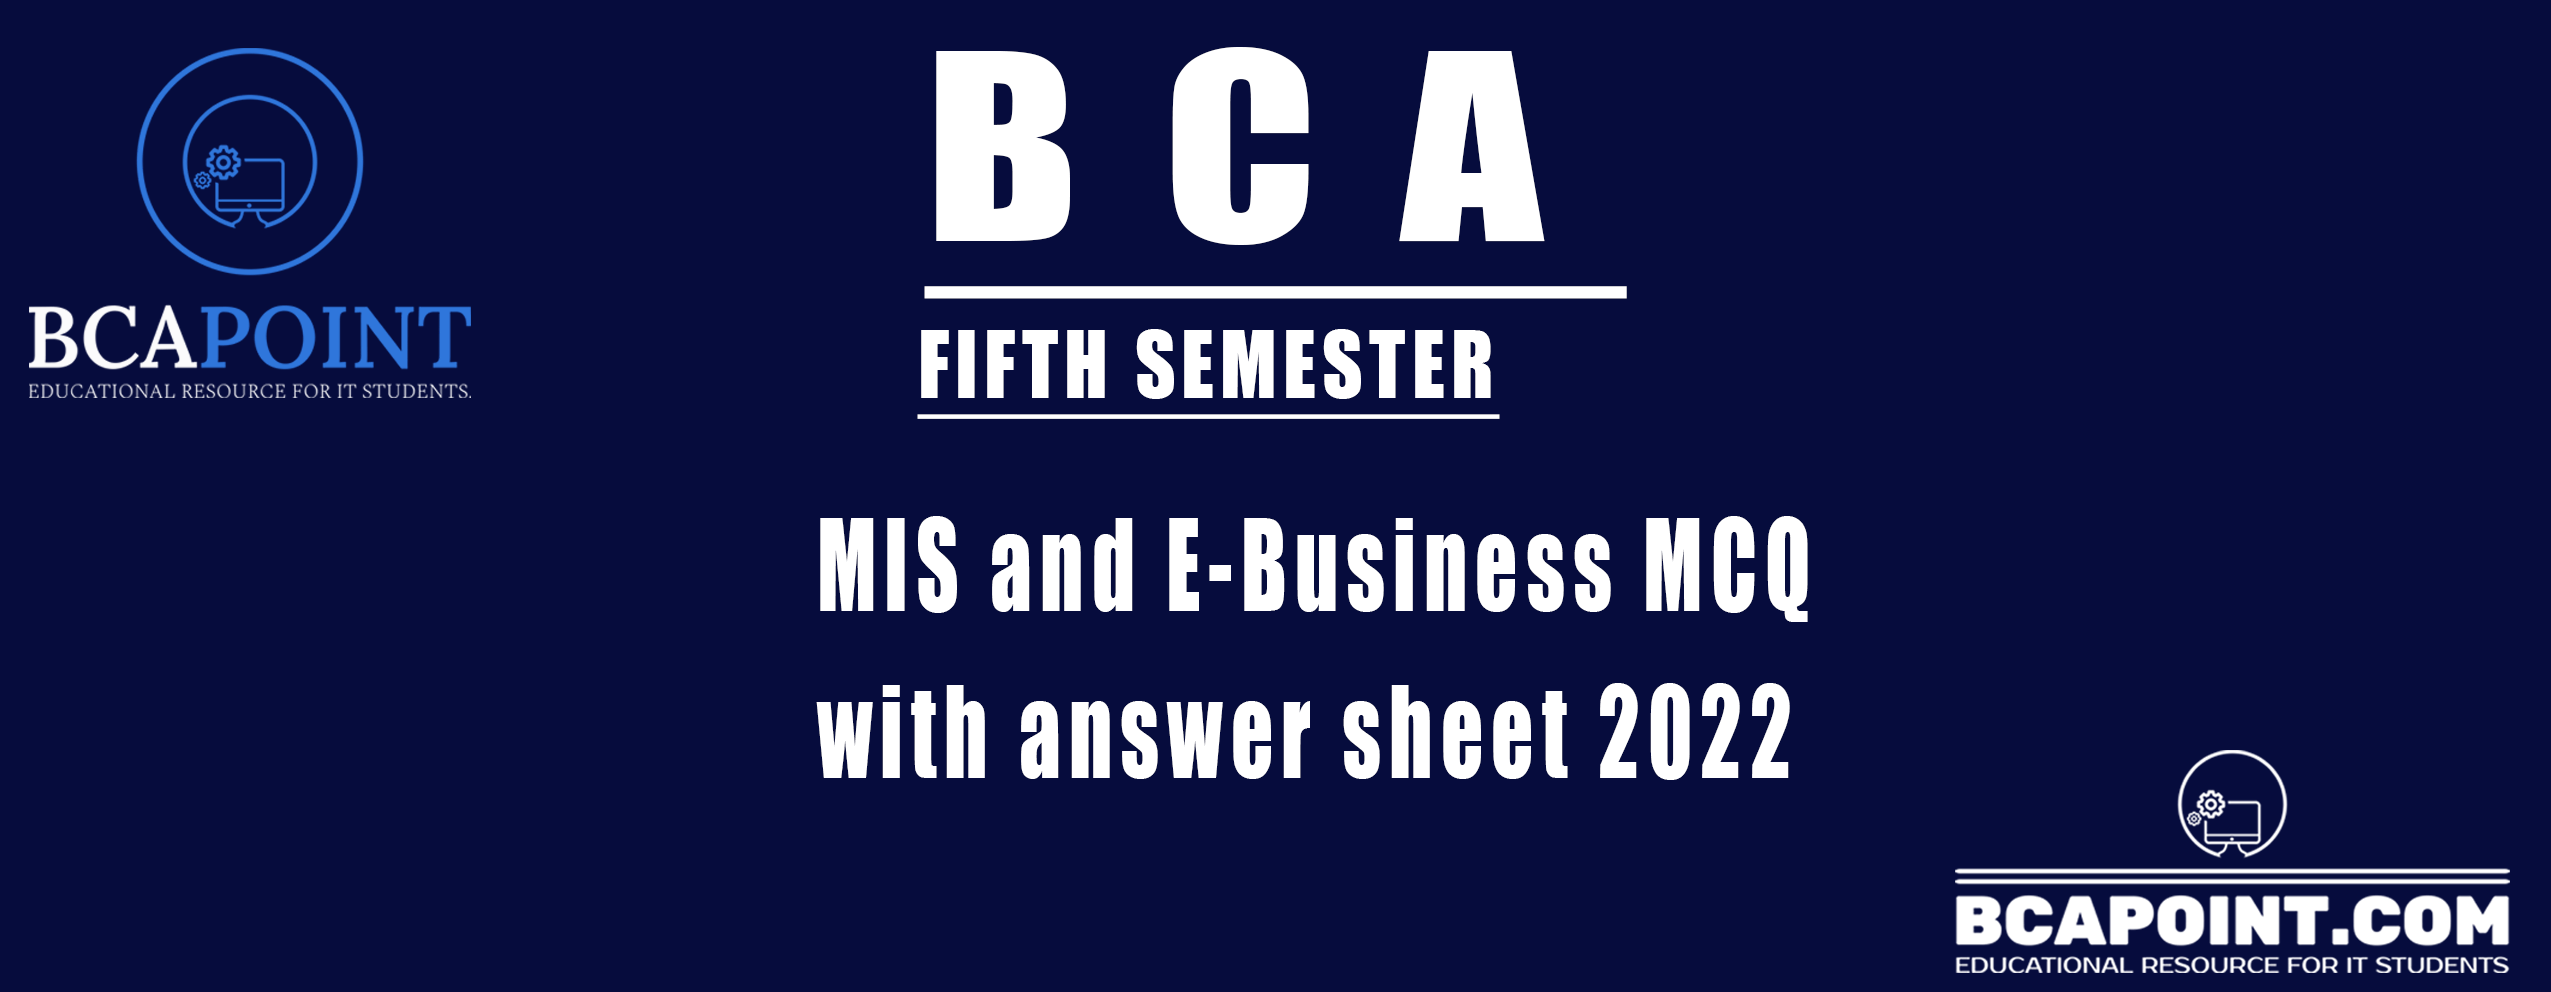 You are currently viewing MIS and E-Business MCQ with answer sheet 2022 BCA Fifth Semester.